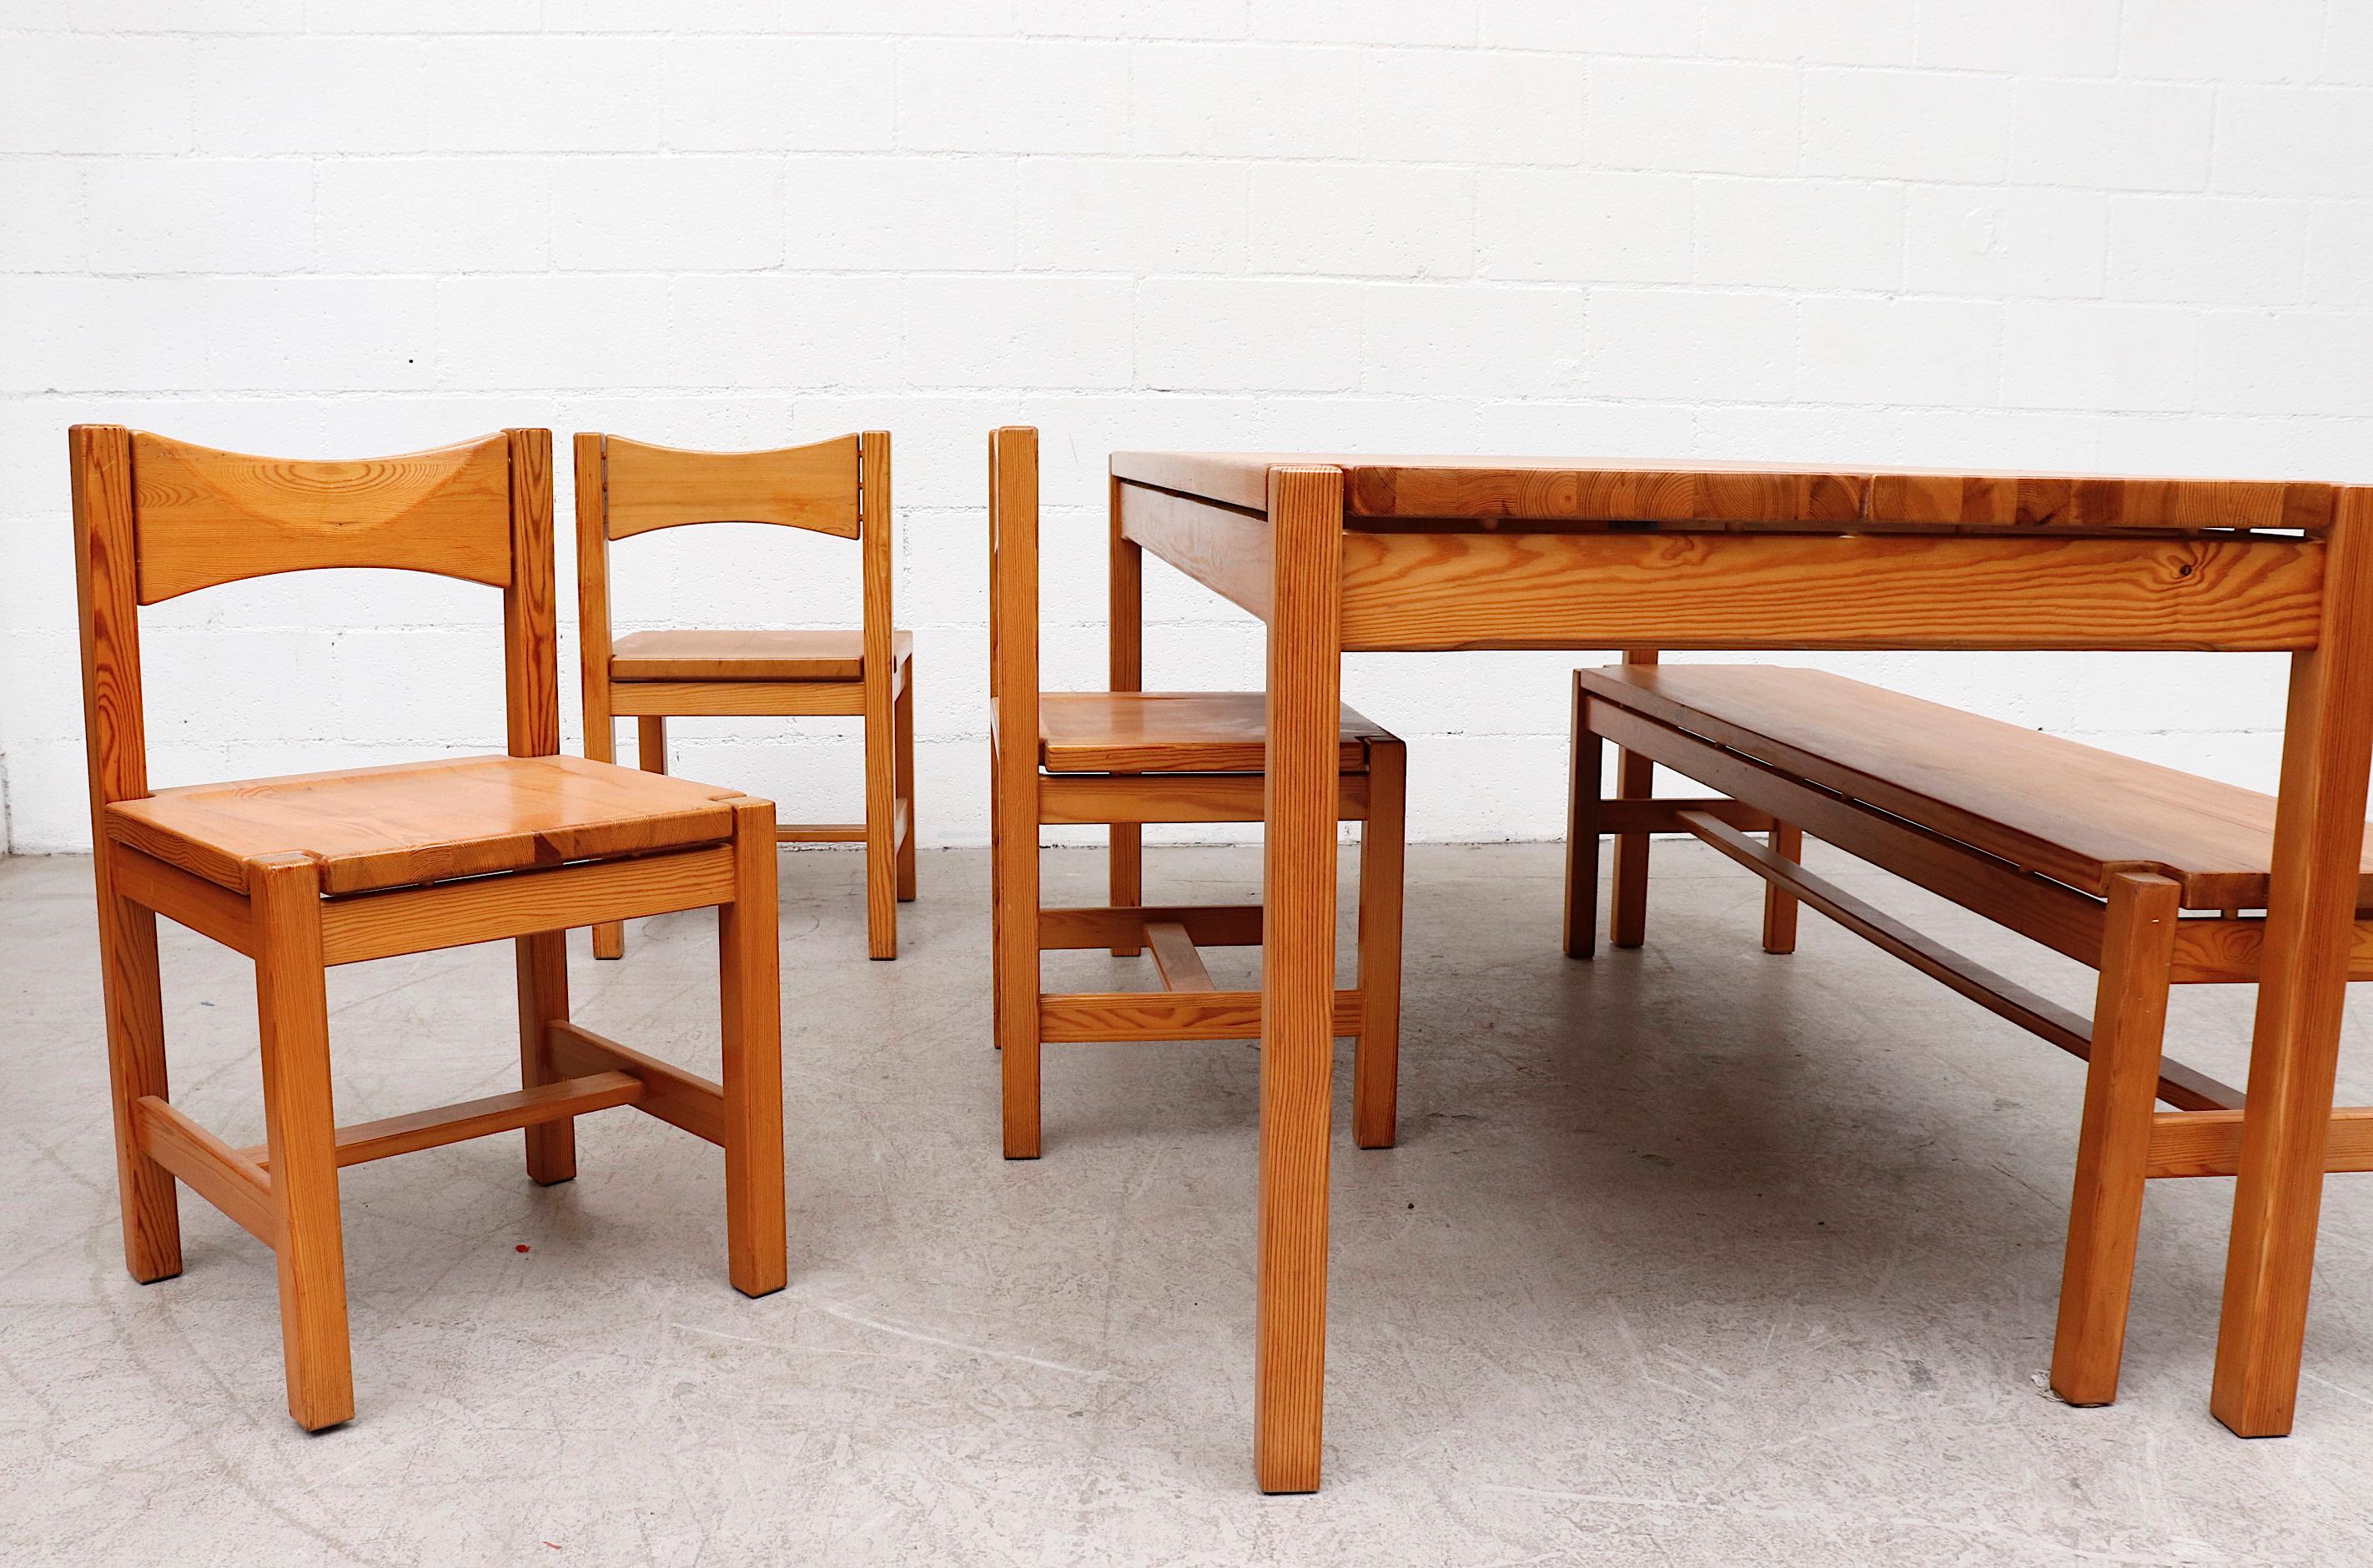 Tapiovaara Pine Dining Set with Bench and 3 Chairs 3